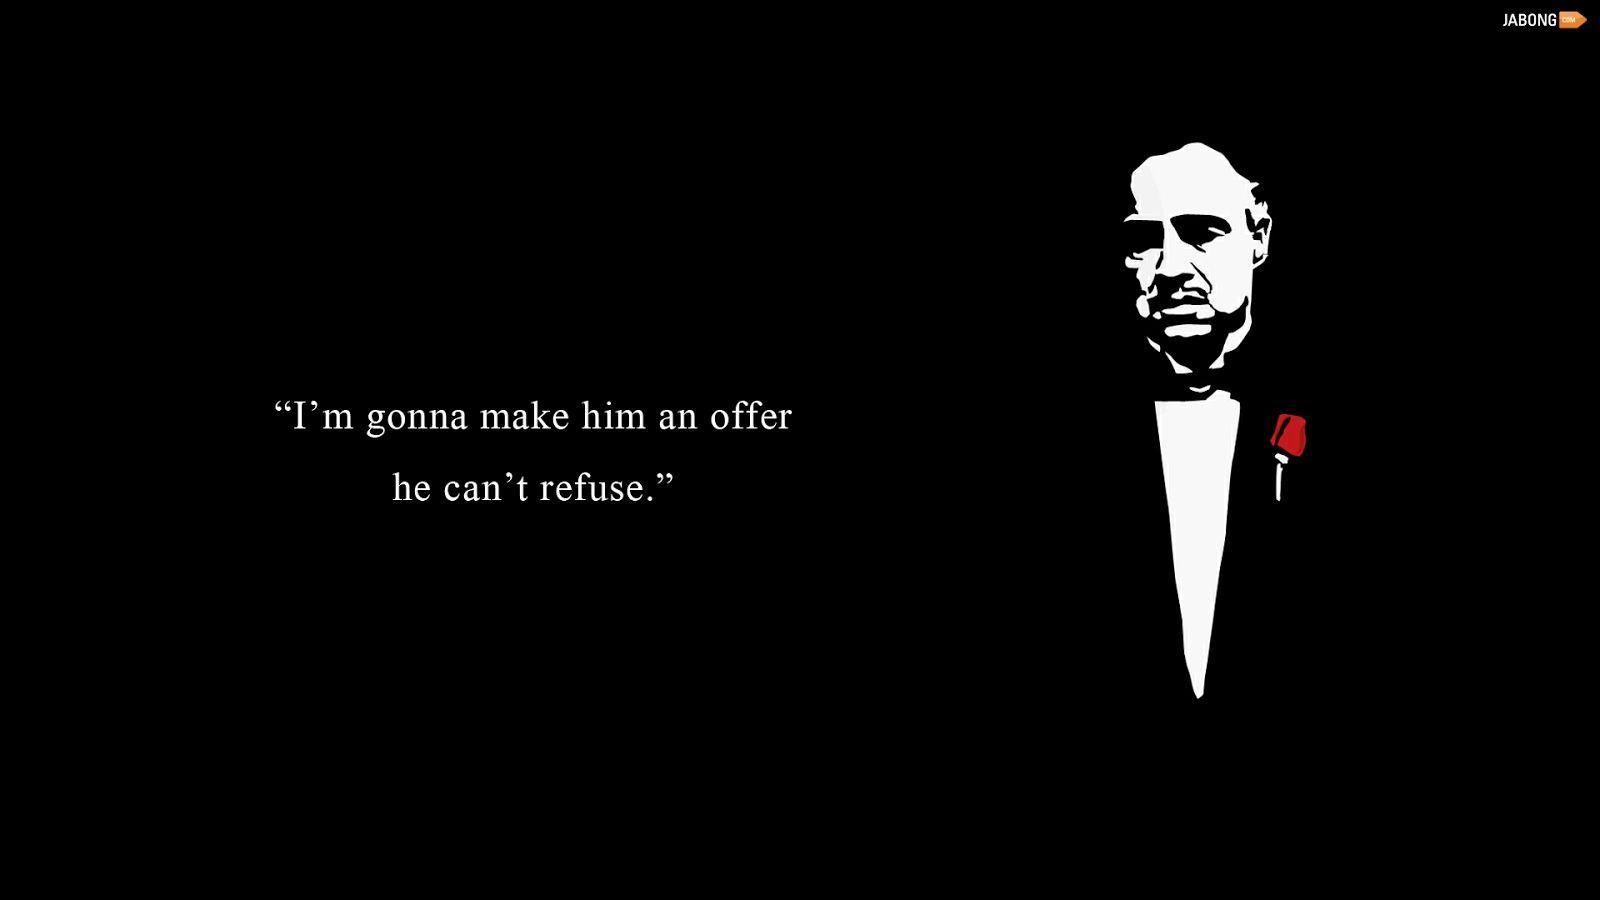 Famous Quotes Wallpaper